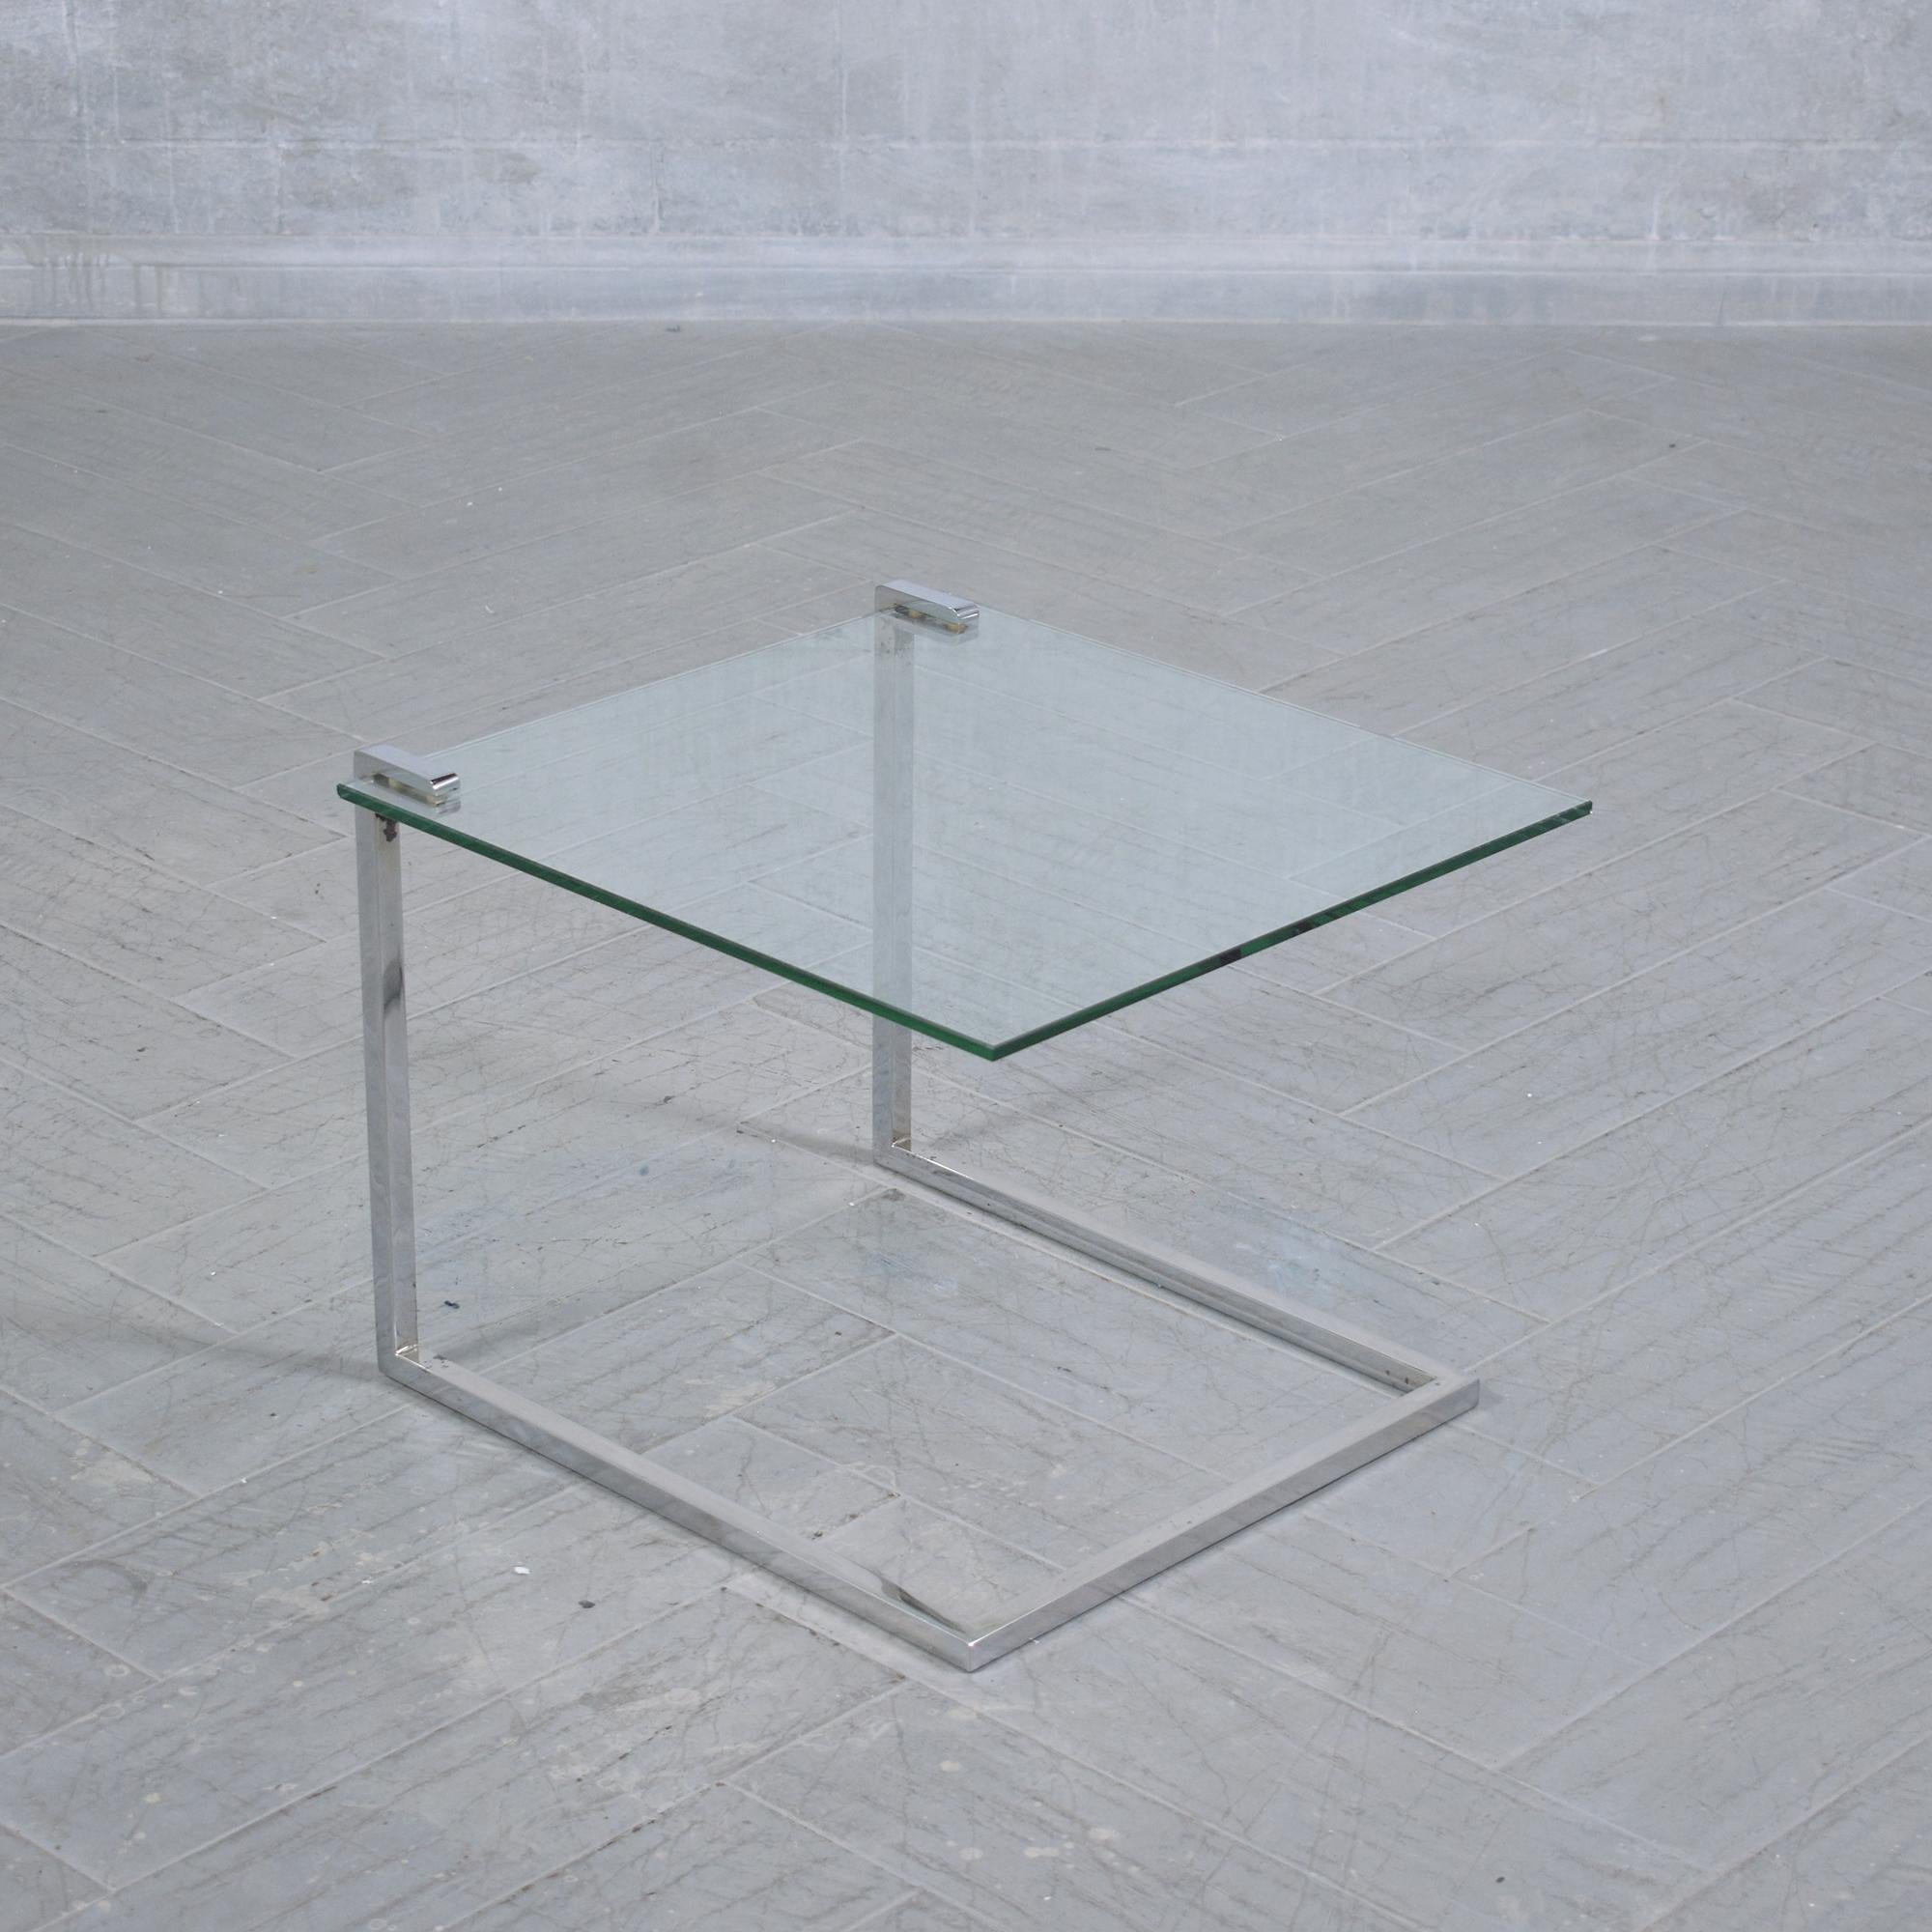 Mid-20th Century Vintage Chrome and Glass End Tables with Unique 'C' Frame Design For Sale